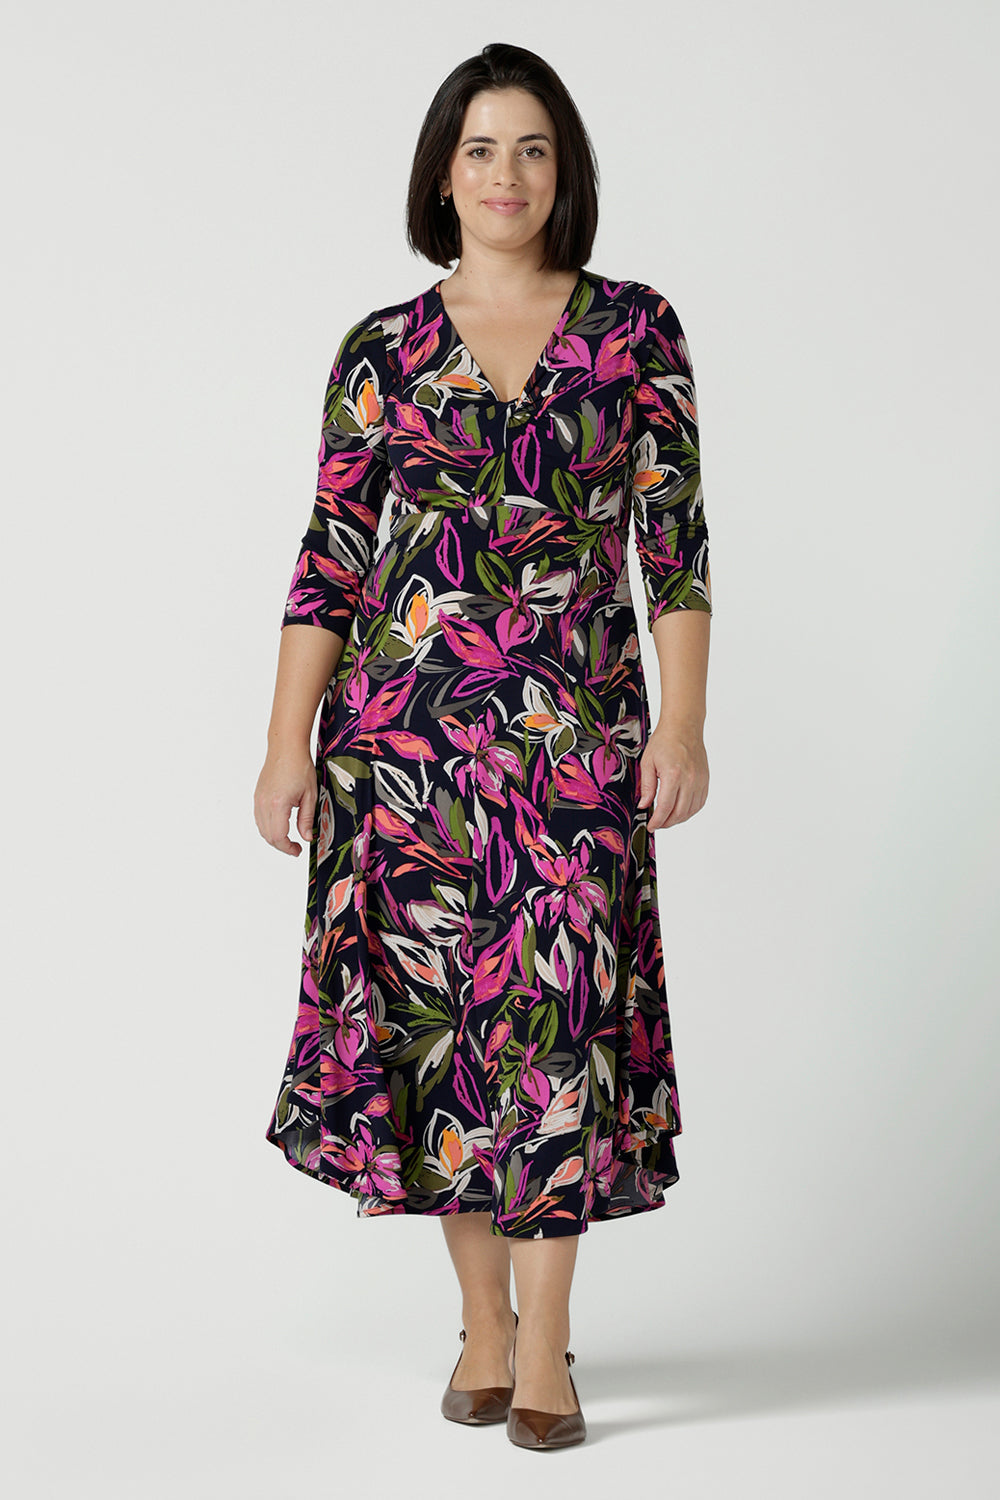 A size 10 woman wears a Kyra dress in Vivid Flora. Empire line fit and flare style with a 3/4 sleeve. Twist front neckline. Flattering shape for all sizes 8 - 24. Made in Australia for corporate casual women.